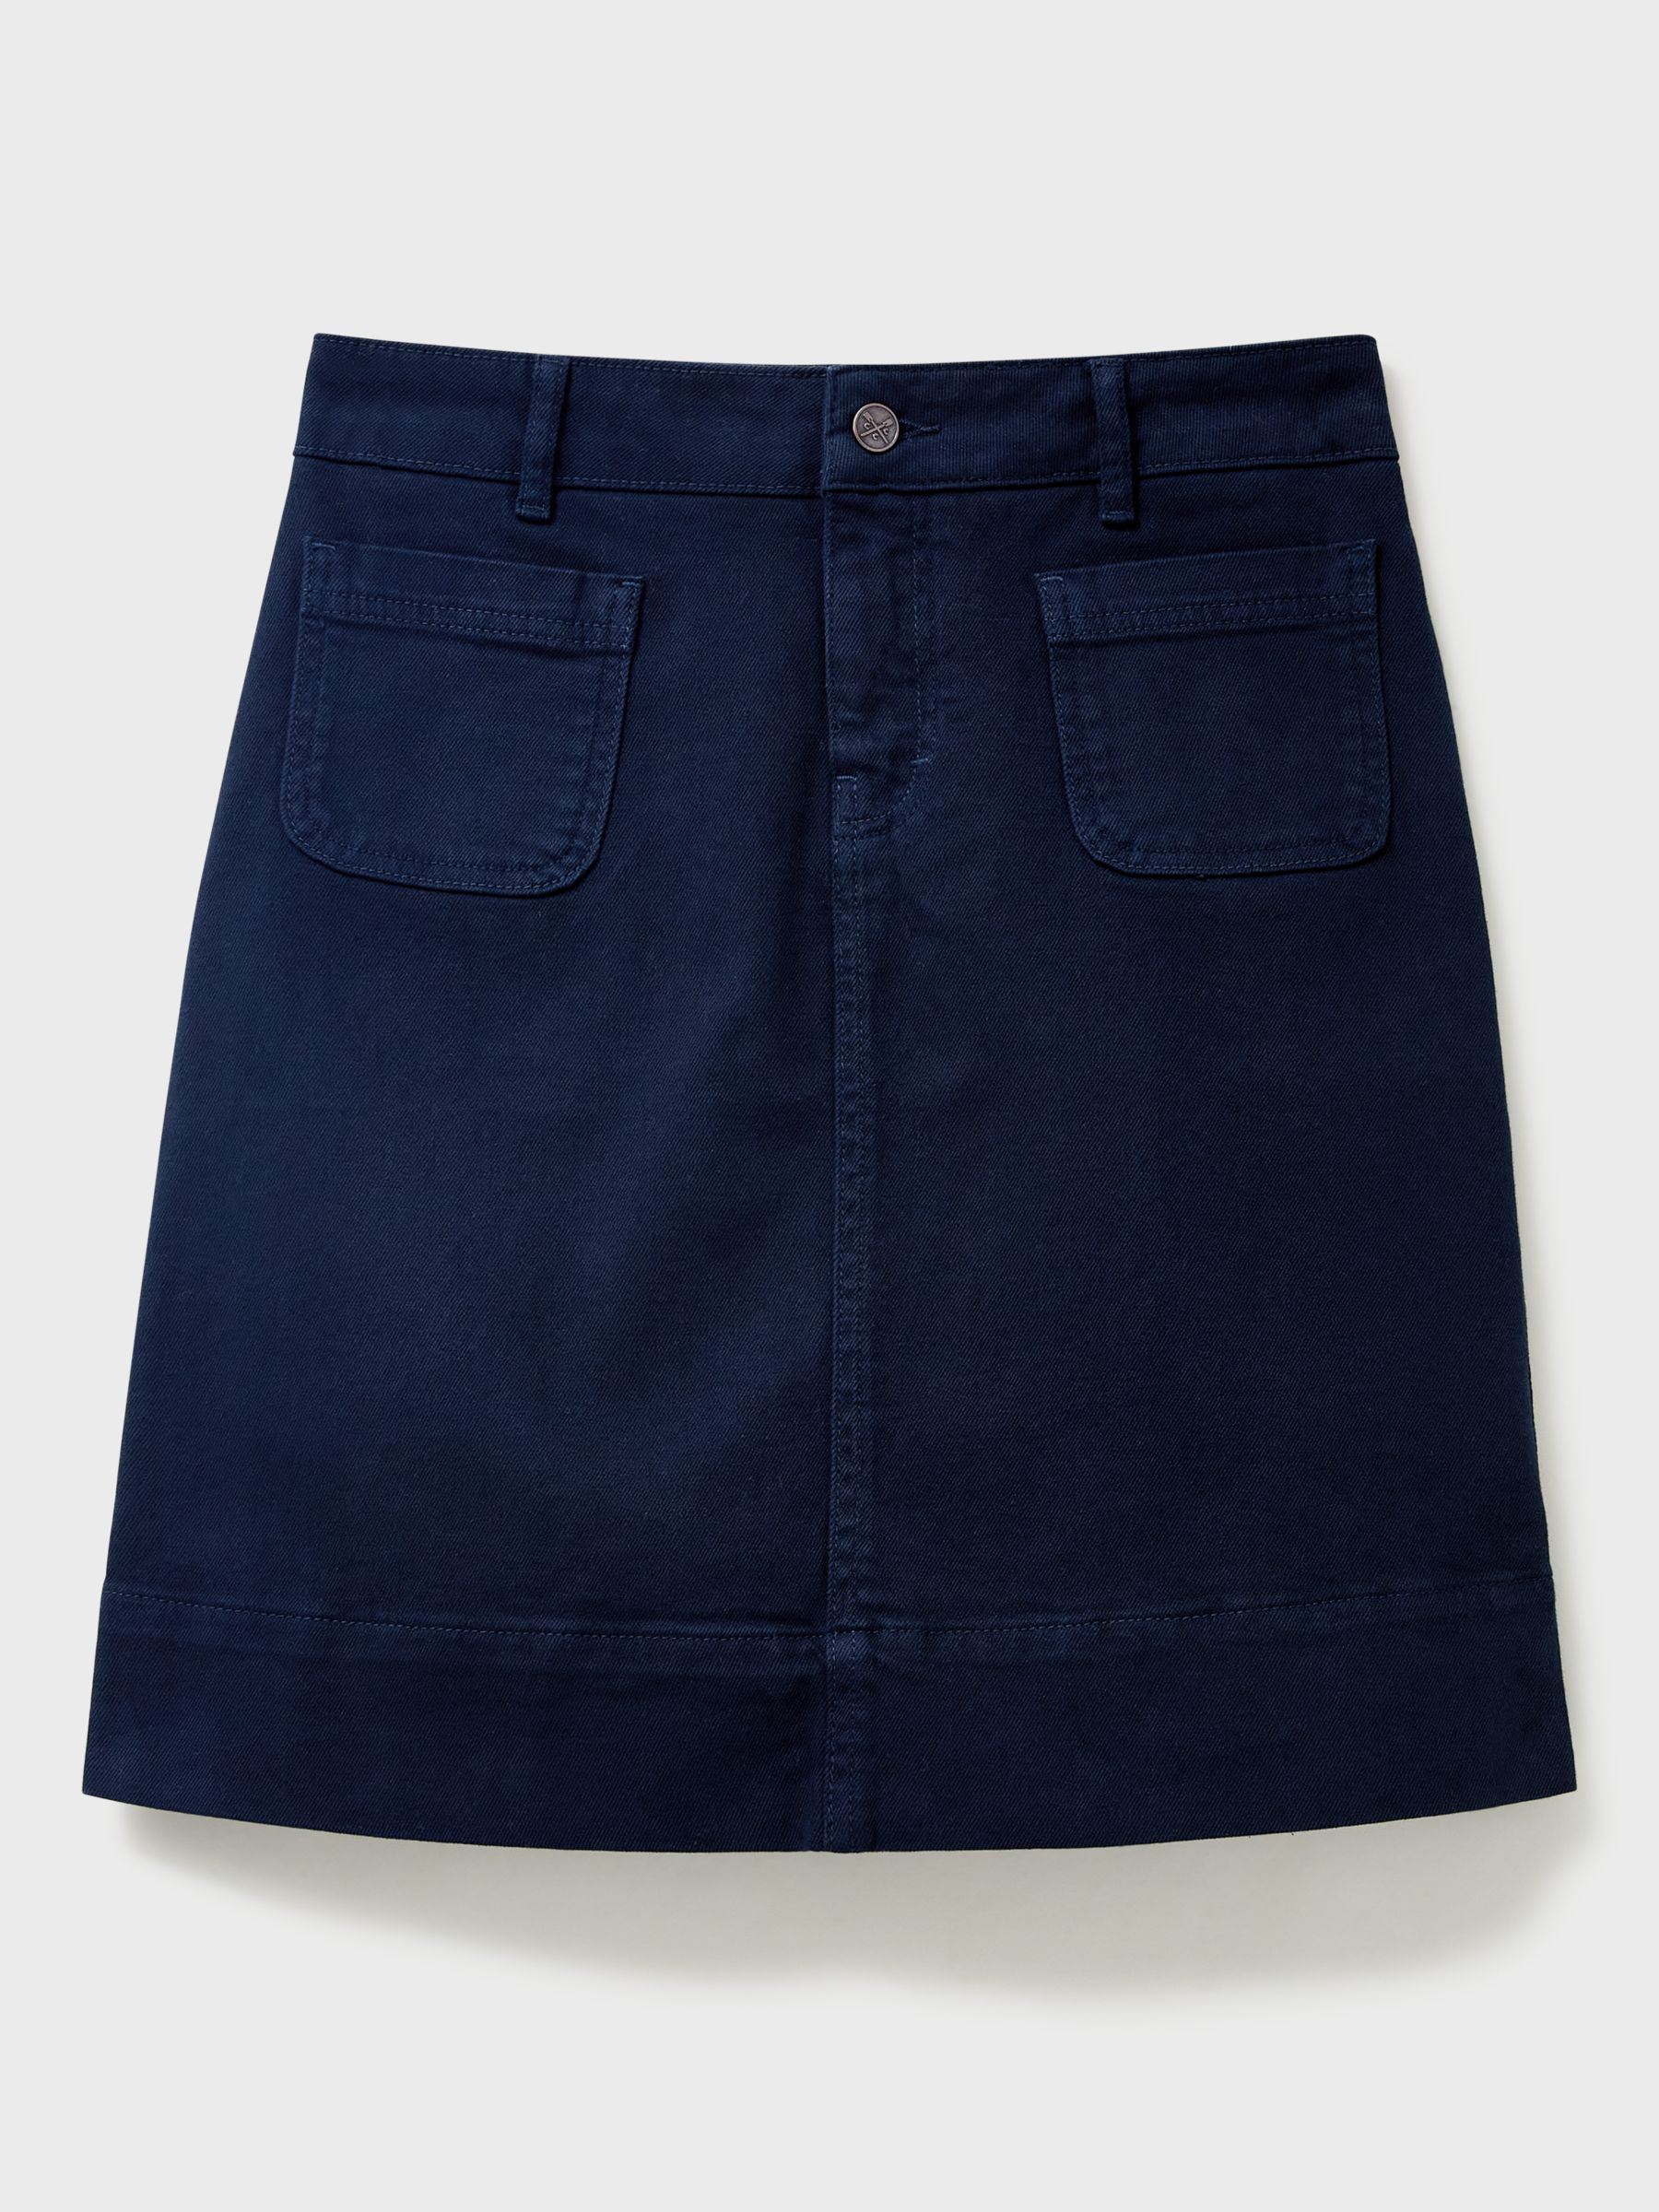 Crew Clothing Analee Twill Skirt, Navy Blue at John Lewis & Partners